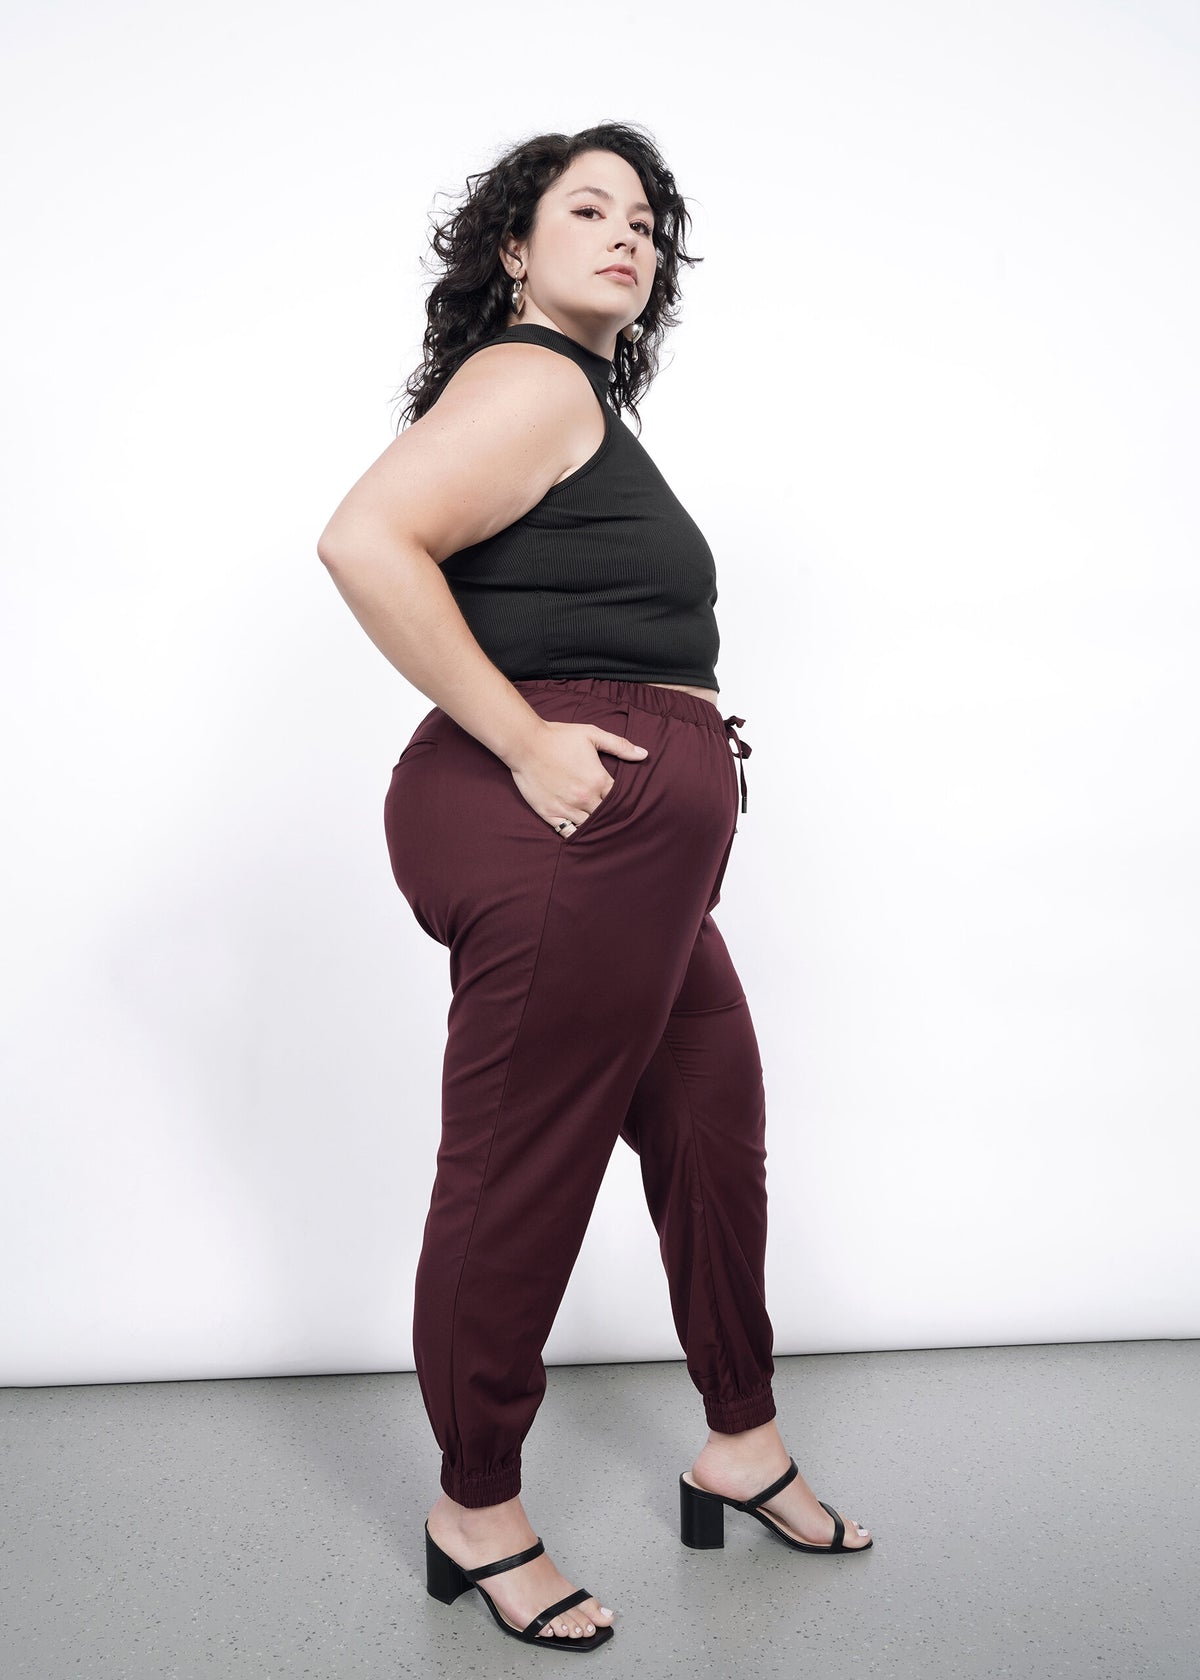 The Empower Drawstring Pant in Merlot